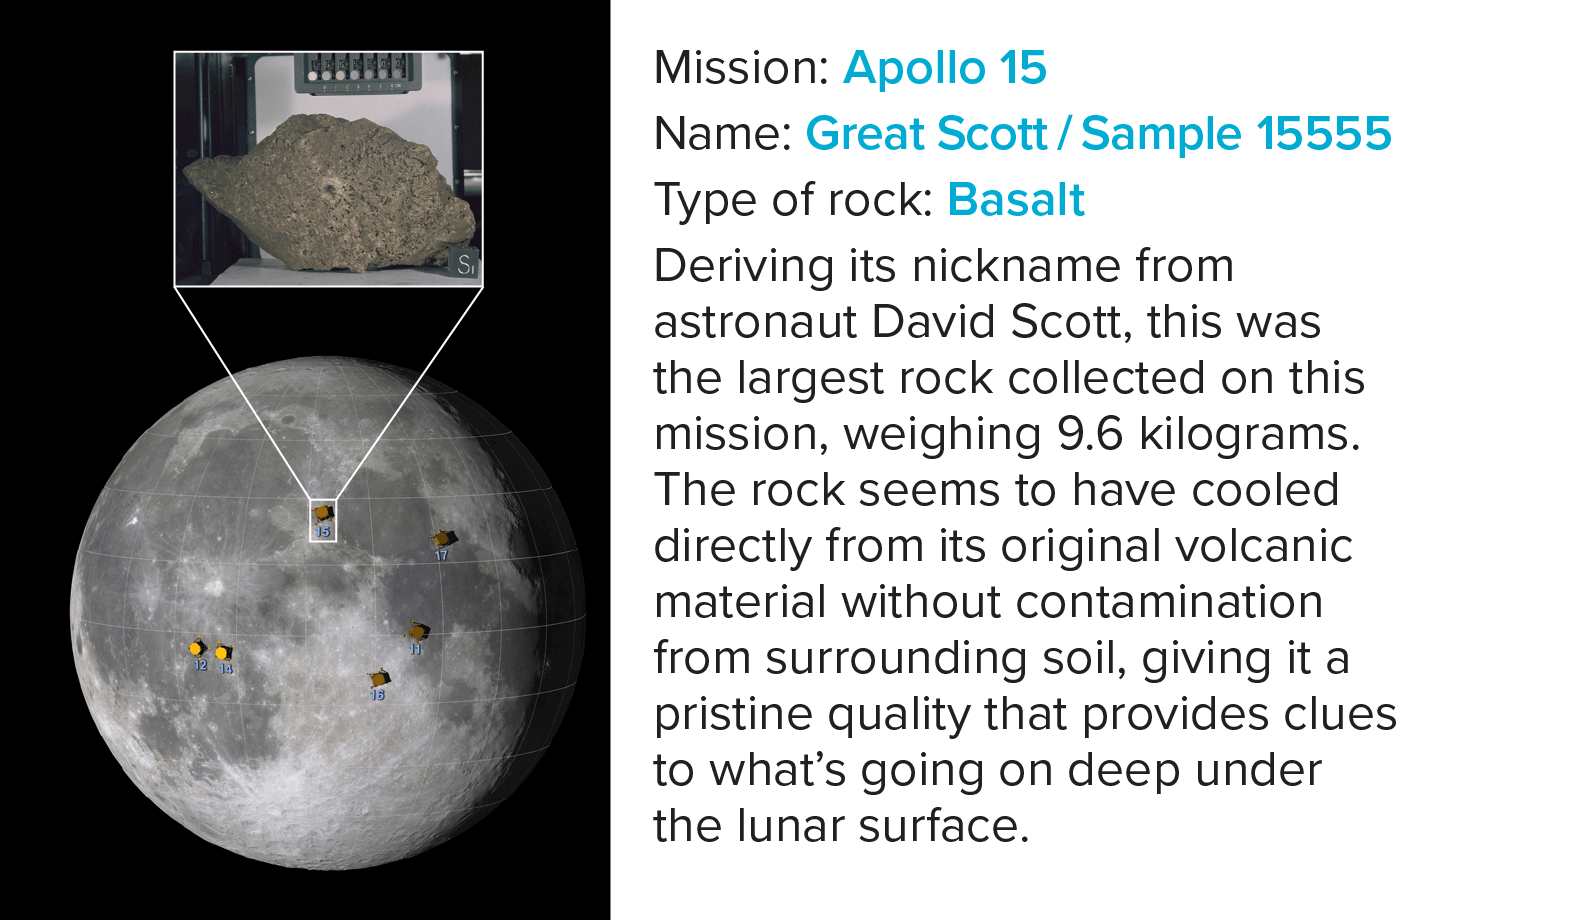 Deriving its nickname from astronaut David Scott, this was the largest rock collected on this mission, weighing 9.6 kilograms. The rock seems to have cooled directly from its original volcanic material without contamination from surrounding soil, giving it a pristine quality that provides researchers clues to what’s going on deep under the lunar surface. 